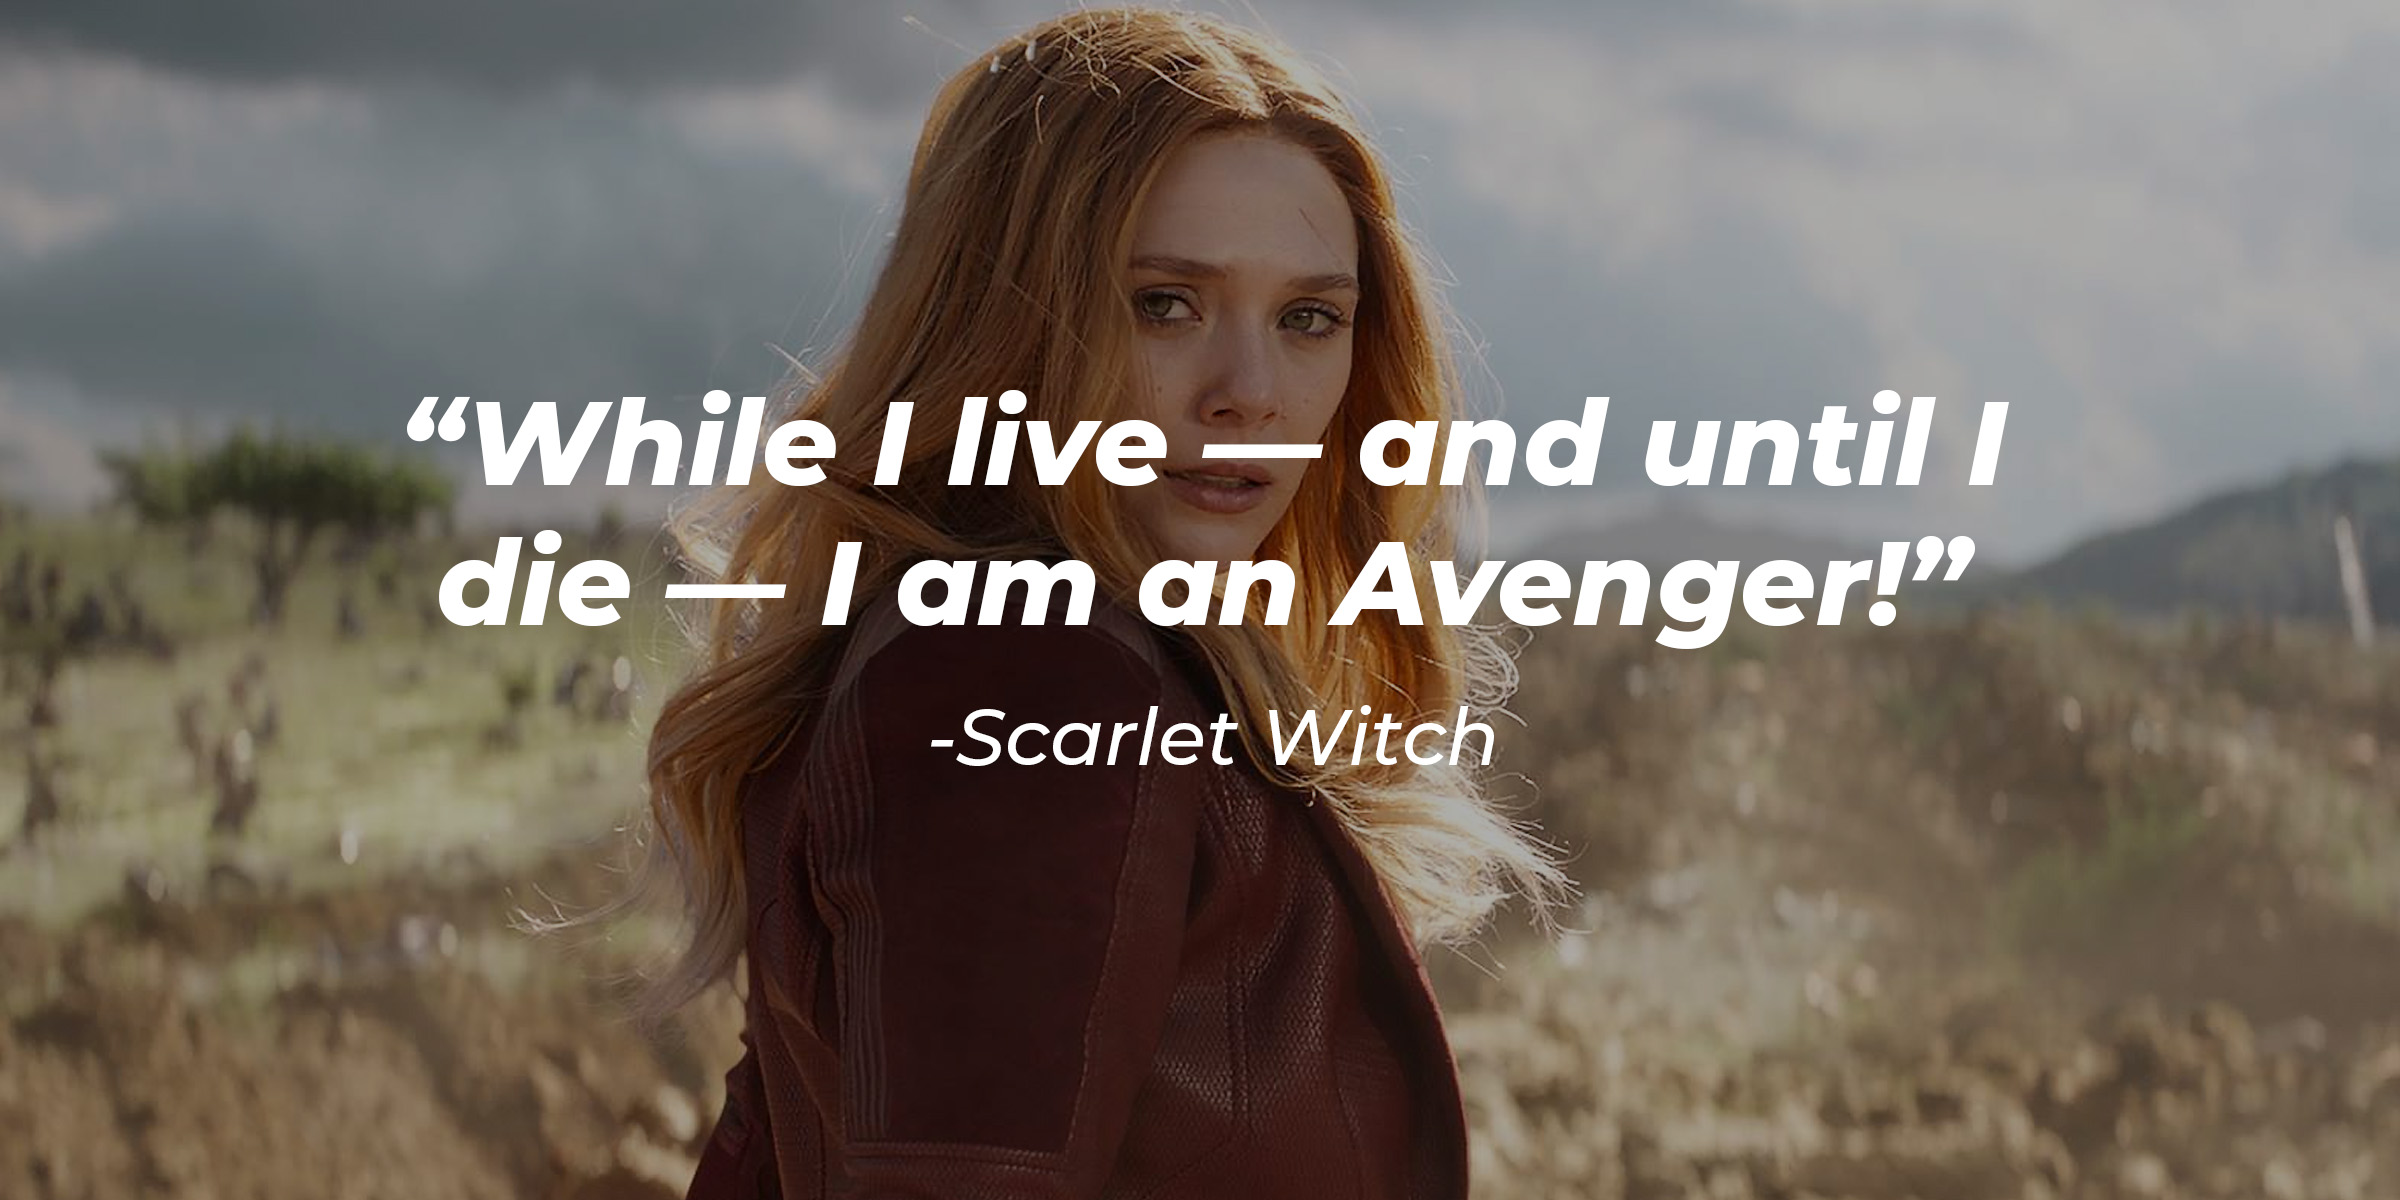 An image of Scarlet Witch, with her quote: "While I live —and until I die — I am an Avenger!" | Source: Facebook.com/DoctorStrangeOfficial